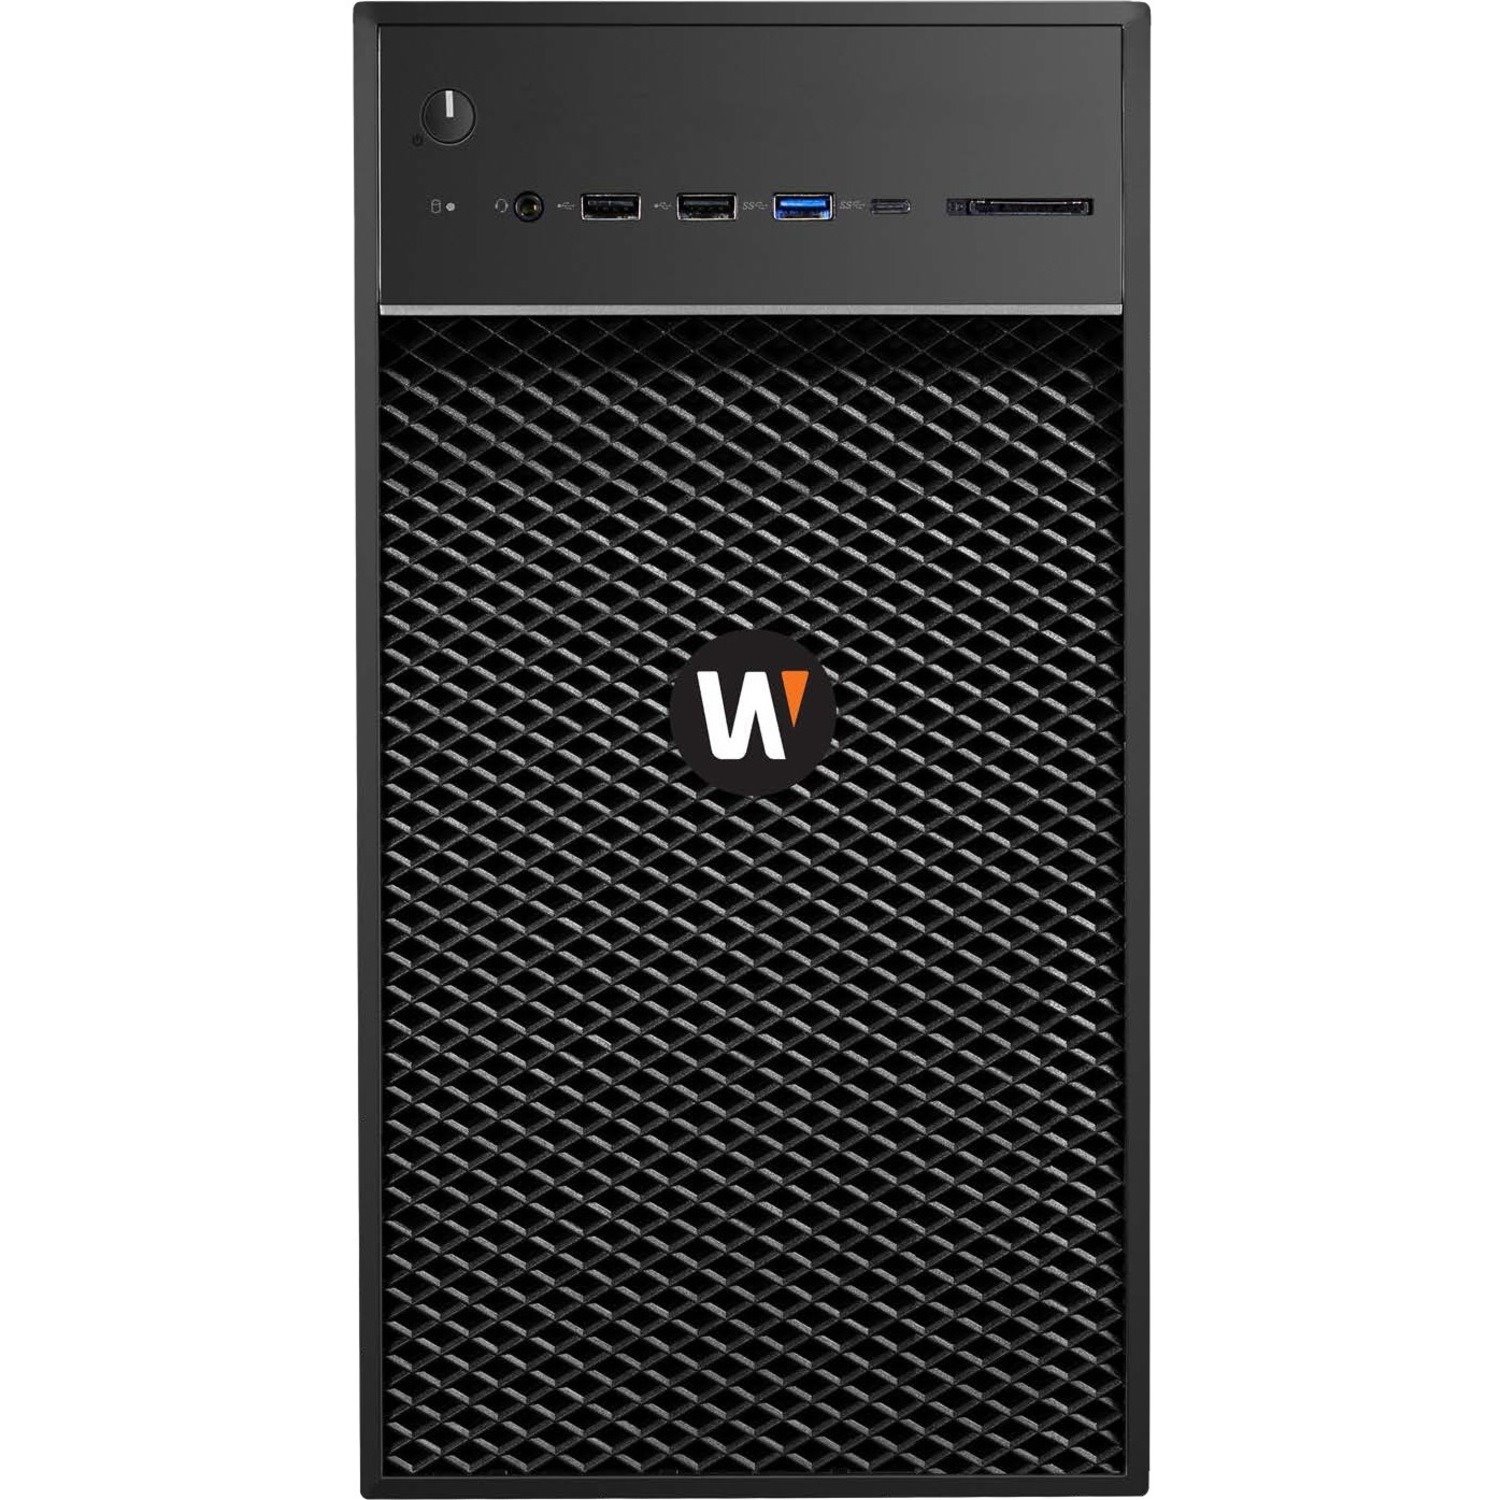 Wisenet WAVE Network Video Recorder - 8 TB HDD